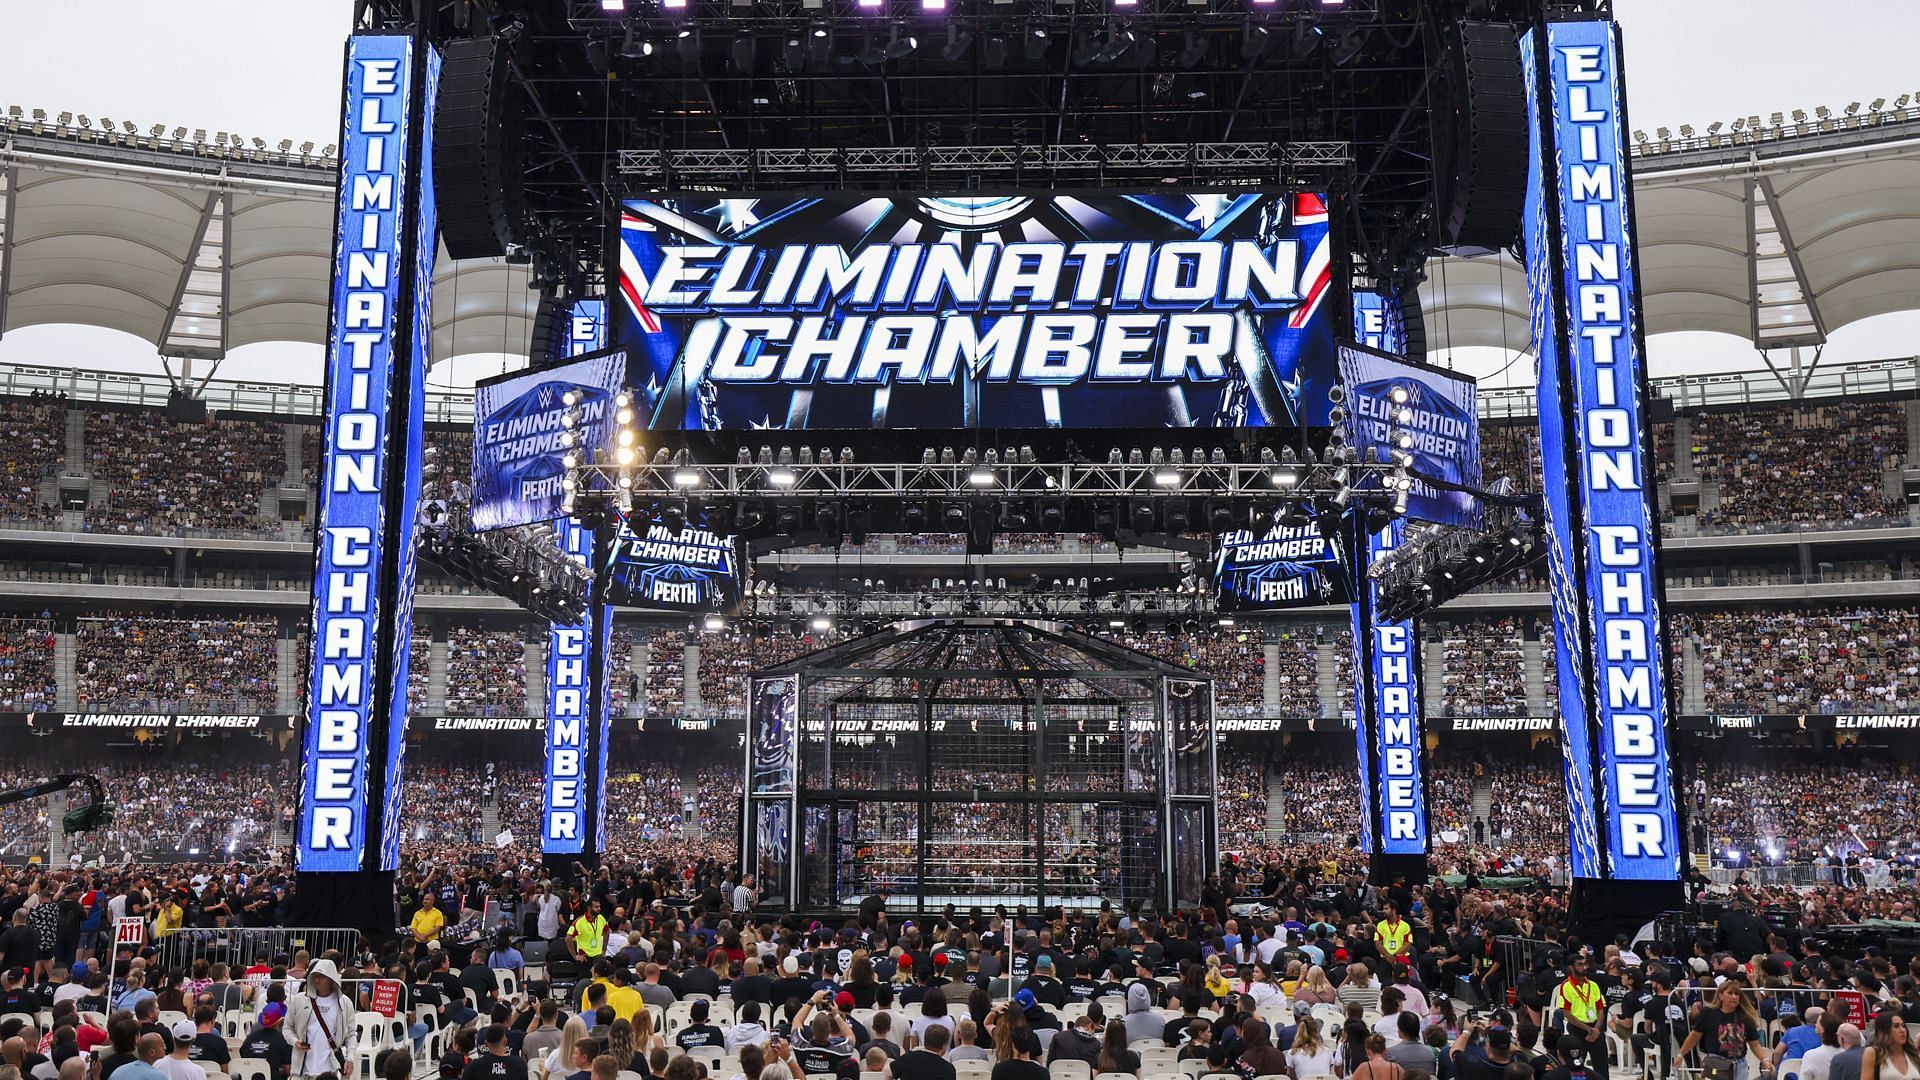 A look at the set for WWE Elimination Chamber at Optus Stadium in Perth